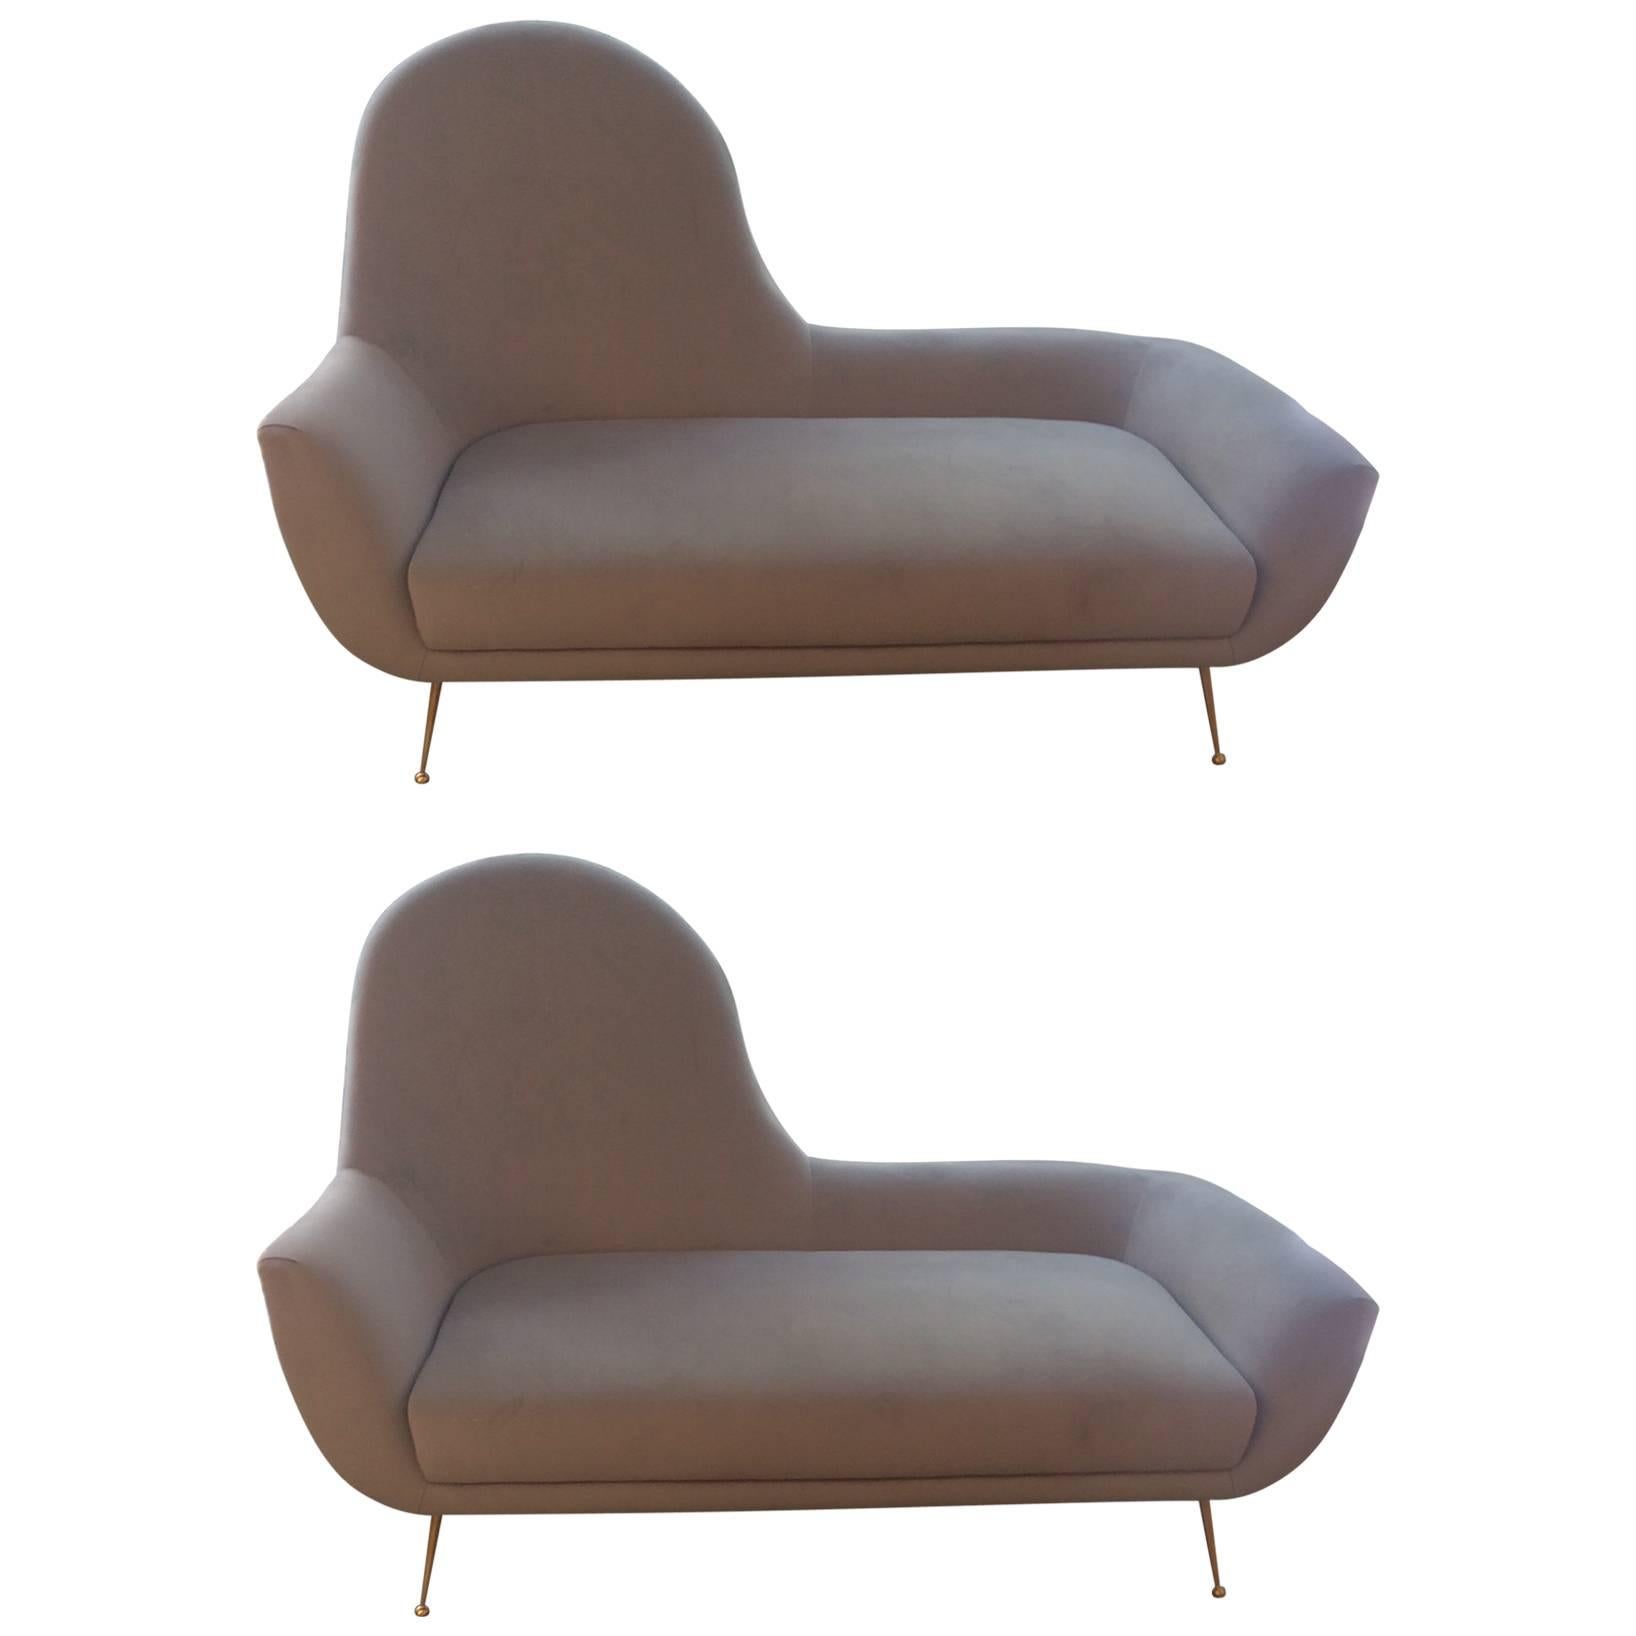 Pair of Italian Sofa's or Chaise Longues in the Style of Gio Ponti